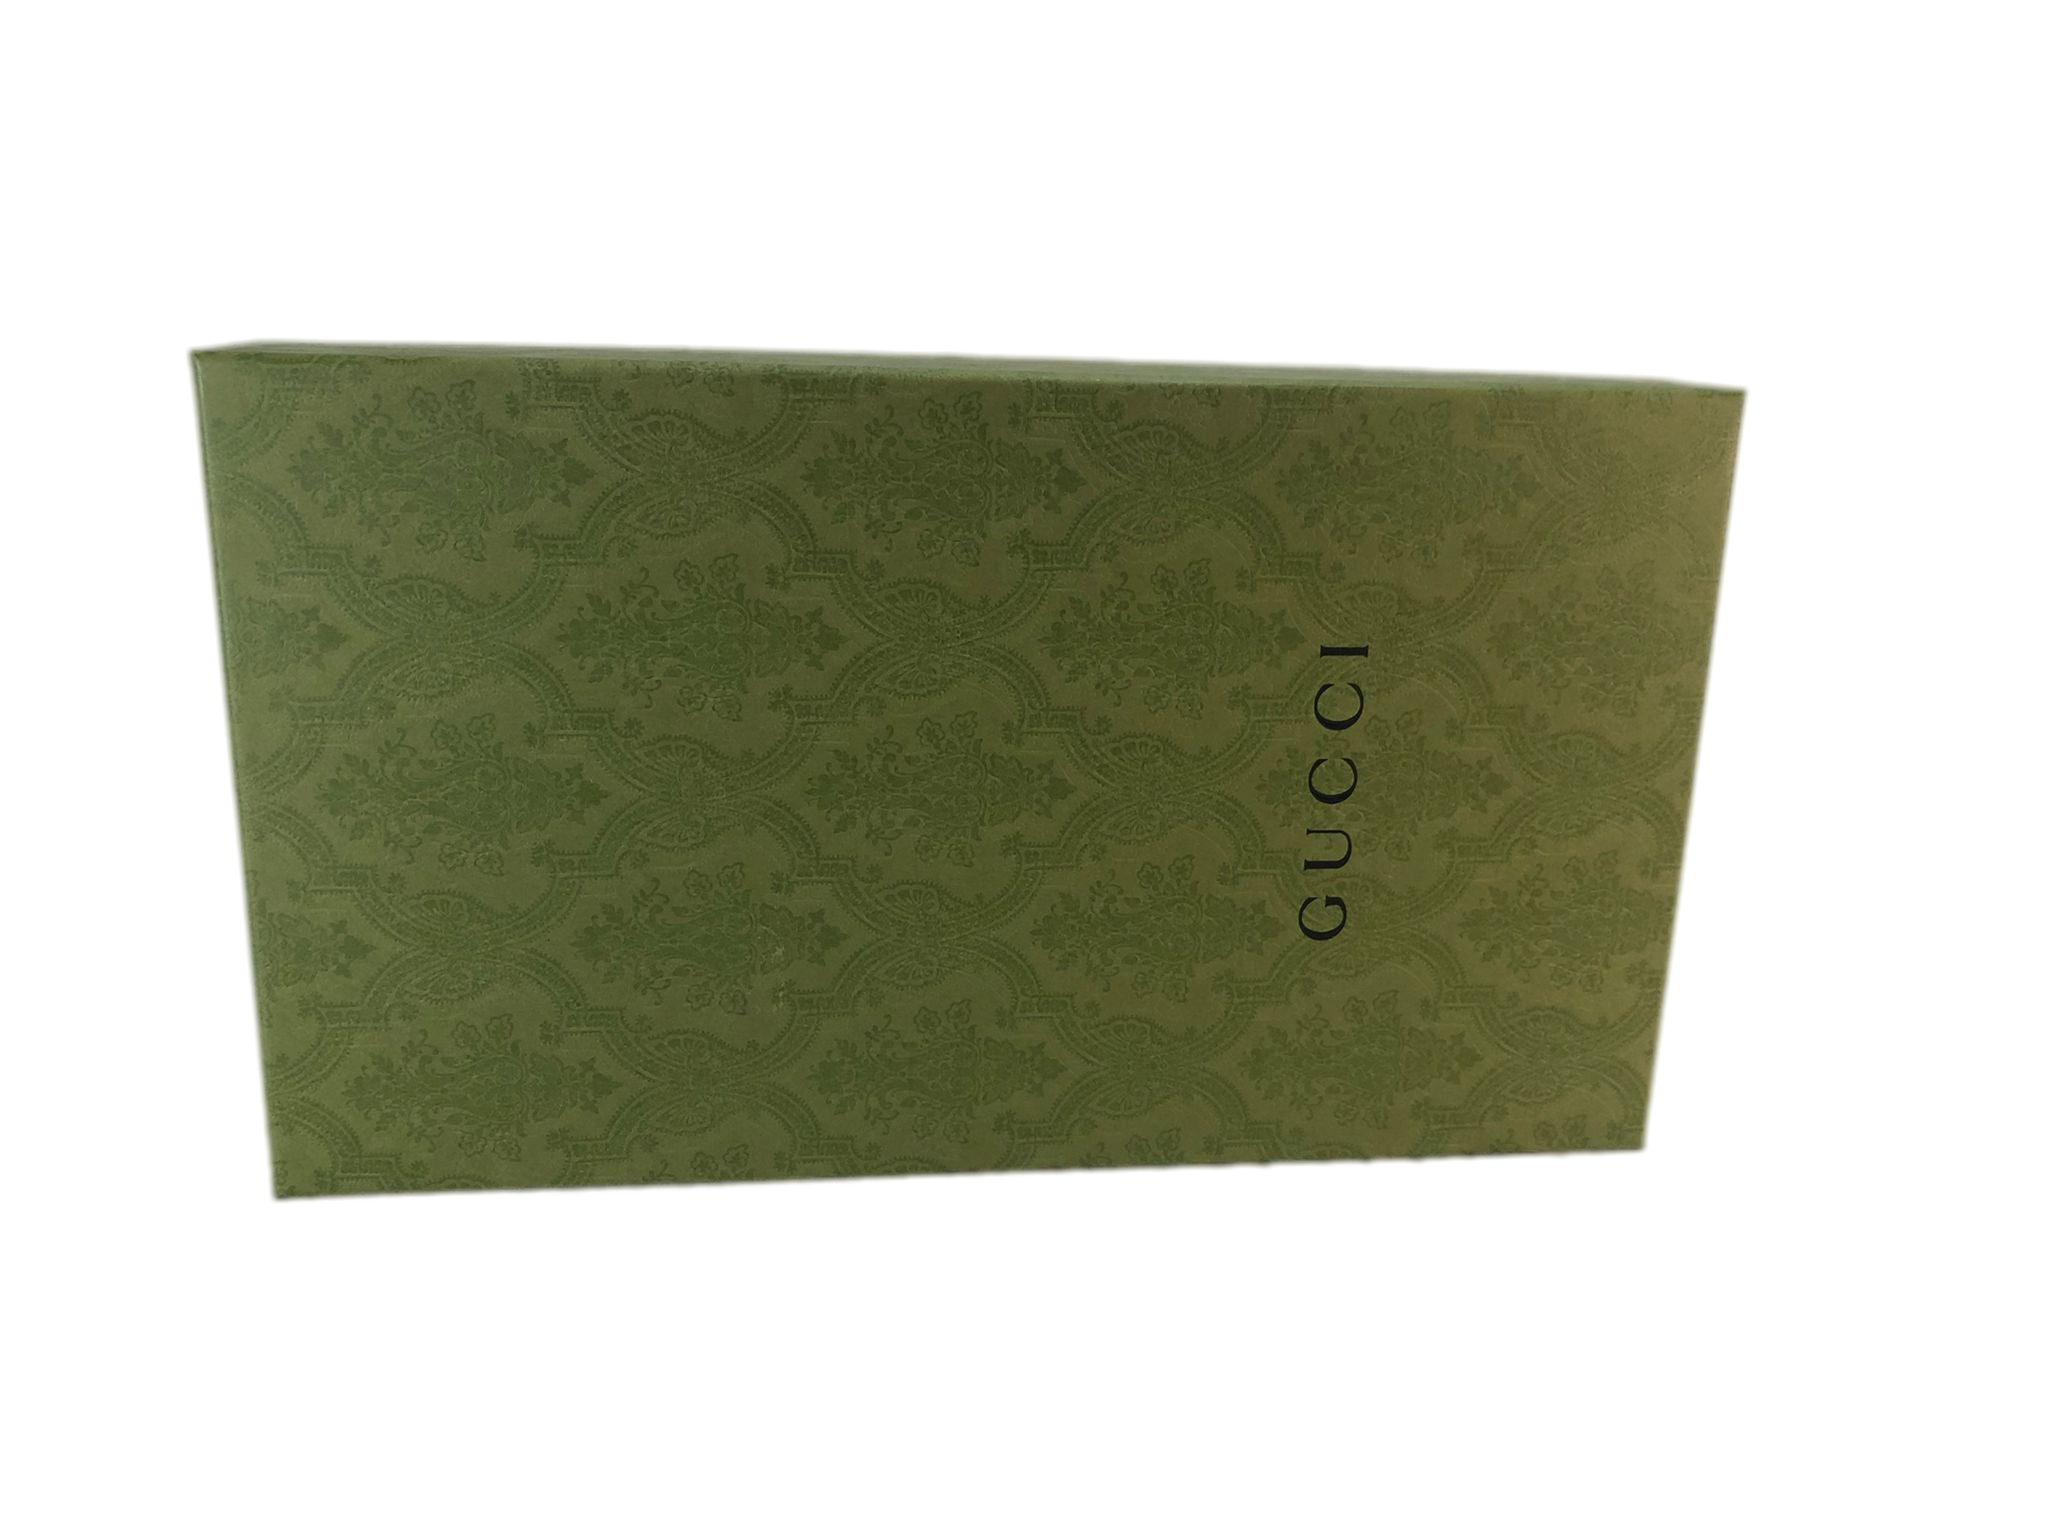 Gucci, Other, Authentic Gucci Green Wallet Box Gift Box